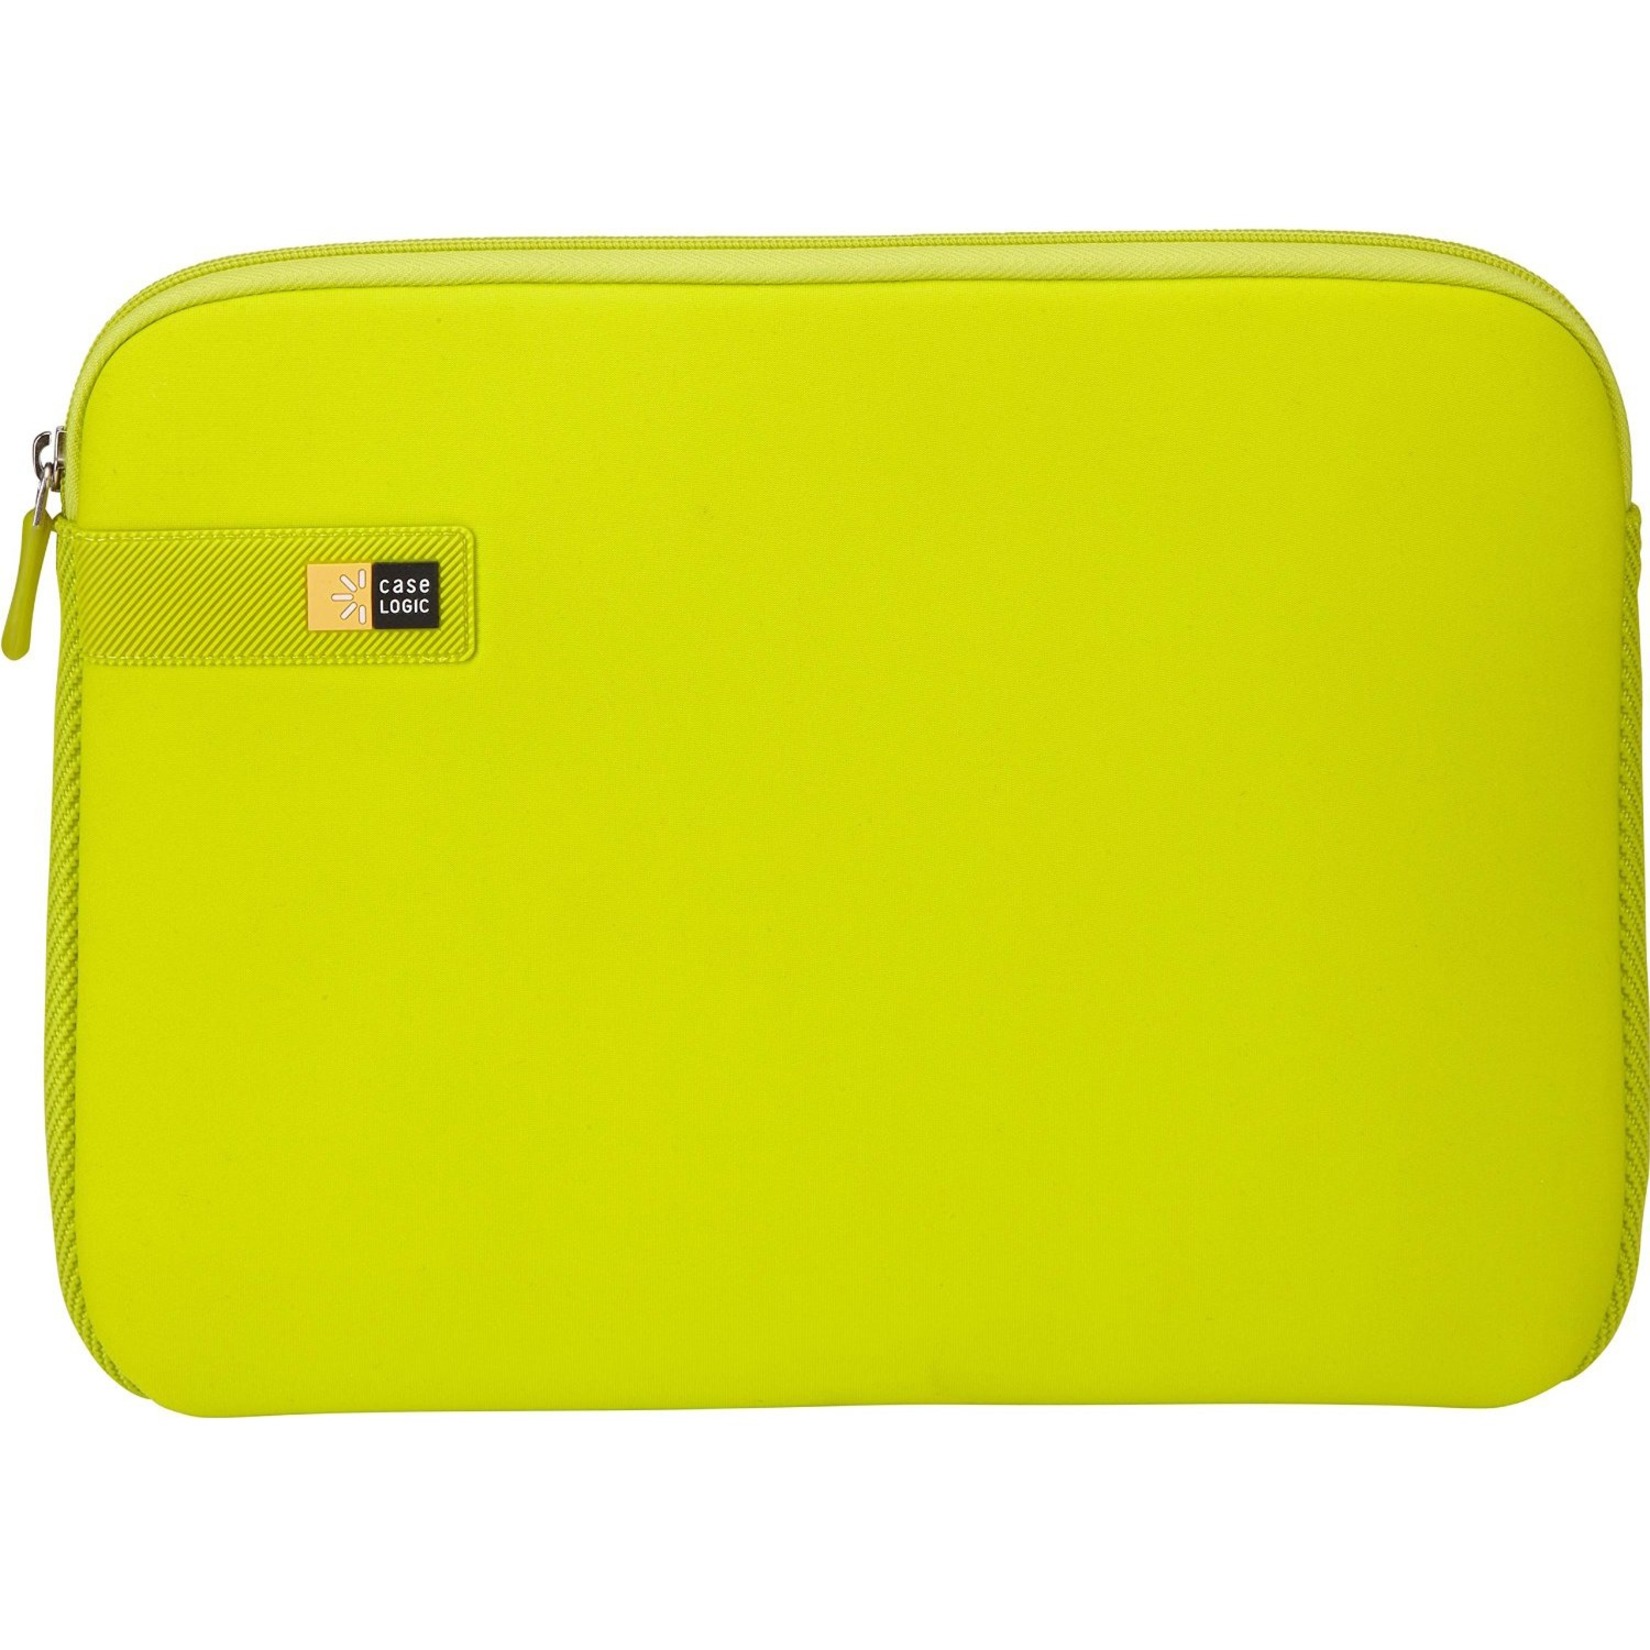 Case Logic LAPS-113 Carrying Case (Sleeve) for 13.3" MacBook Pro, Yellow - image 4 of 7